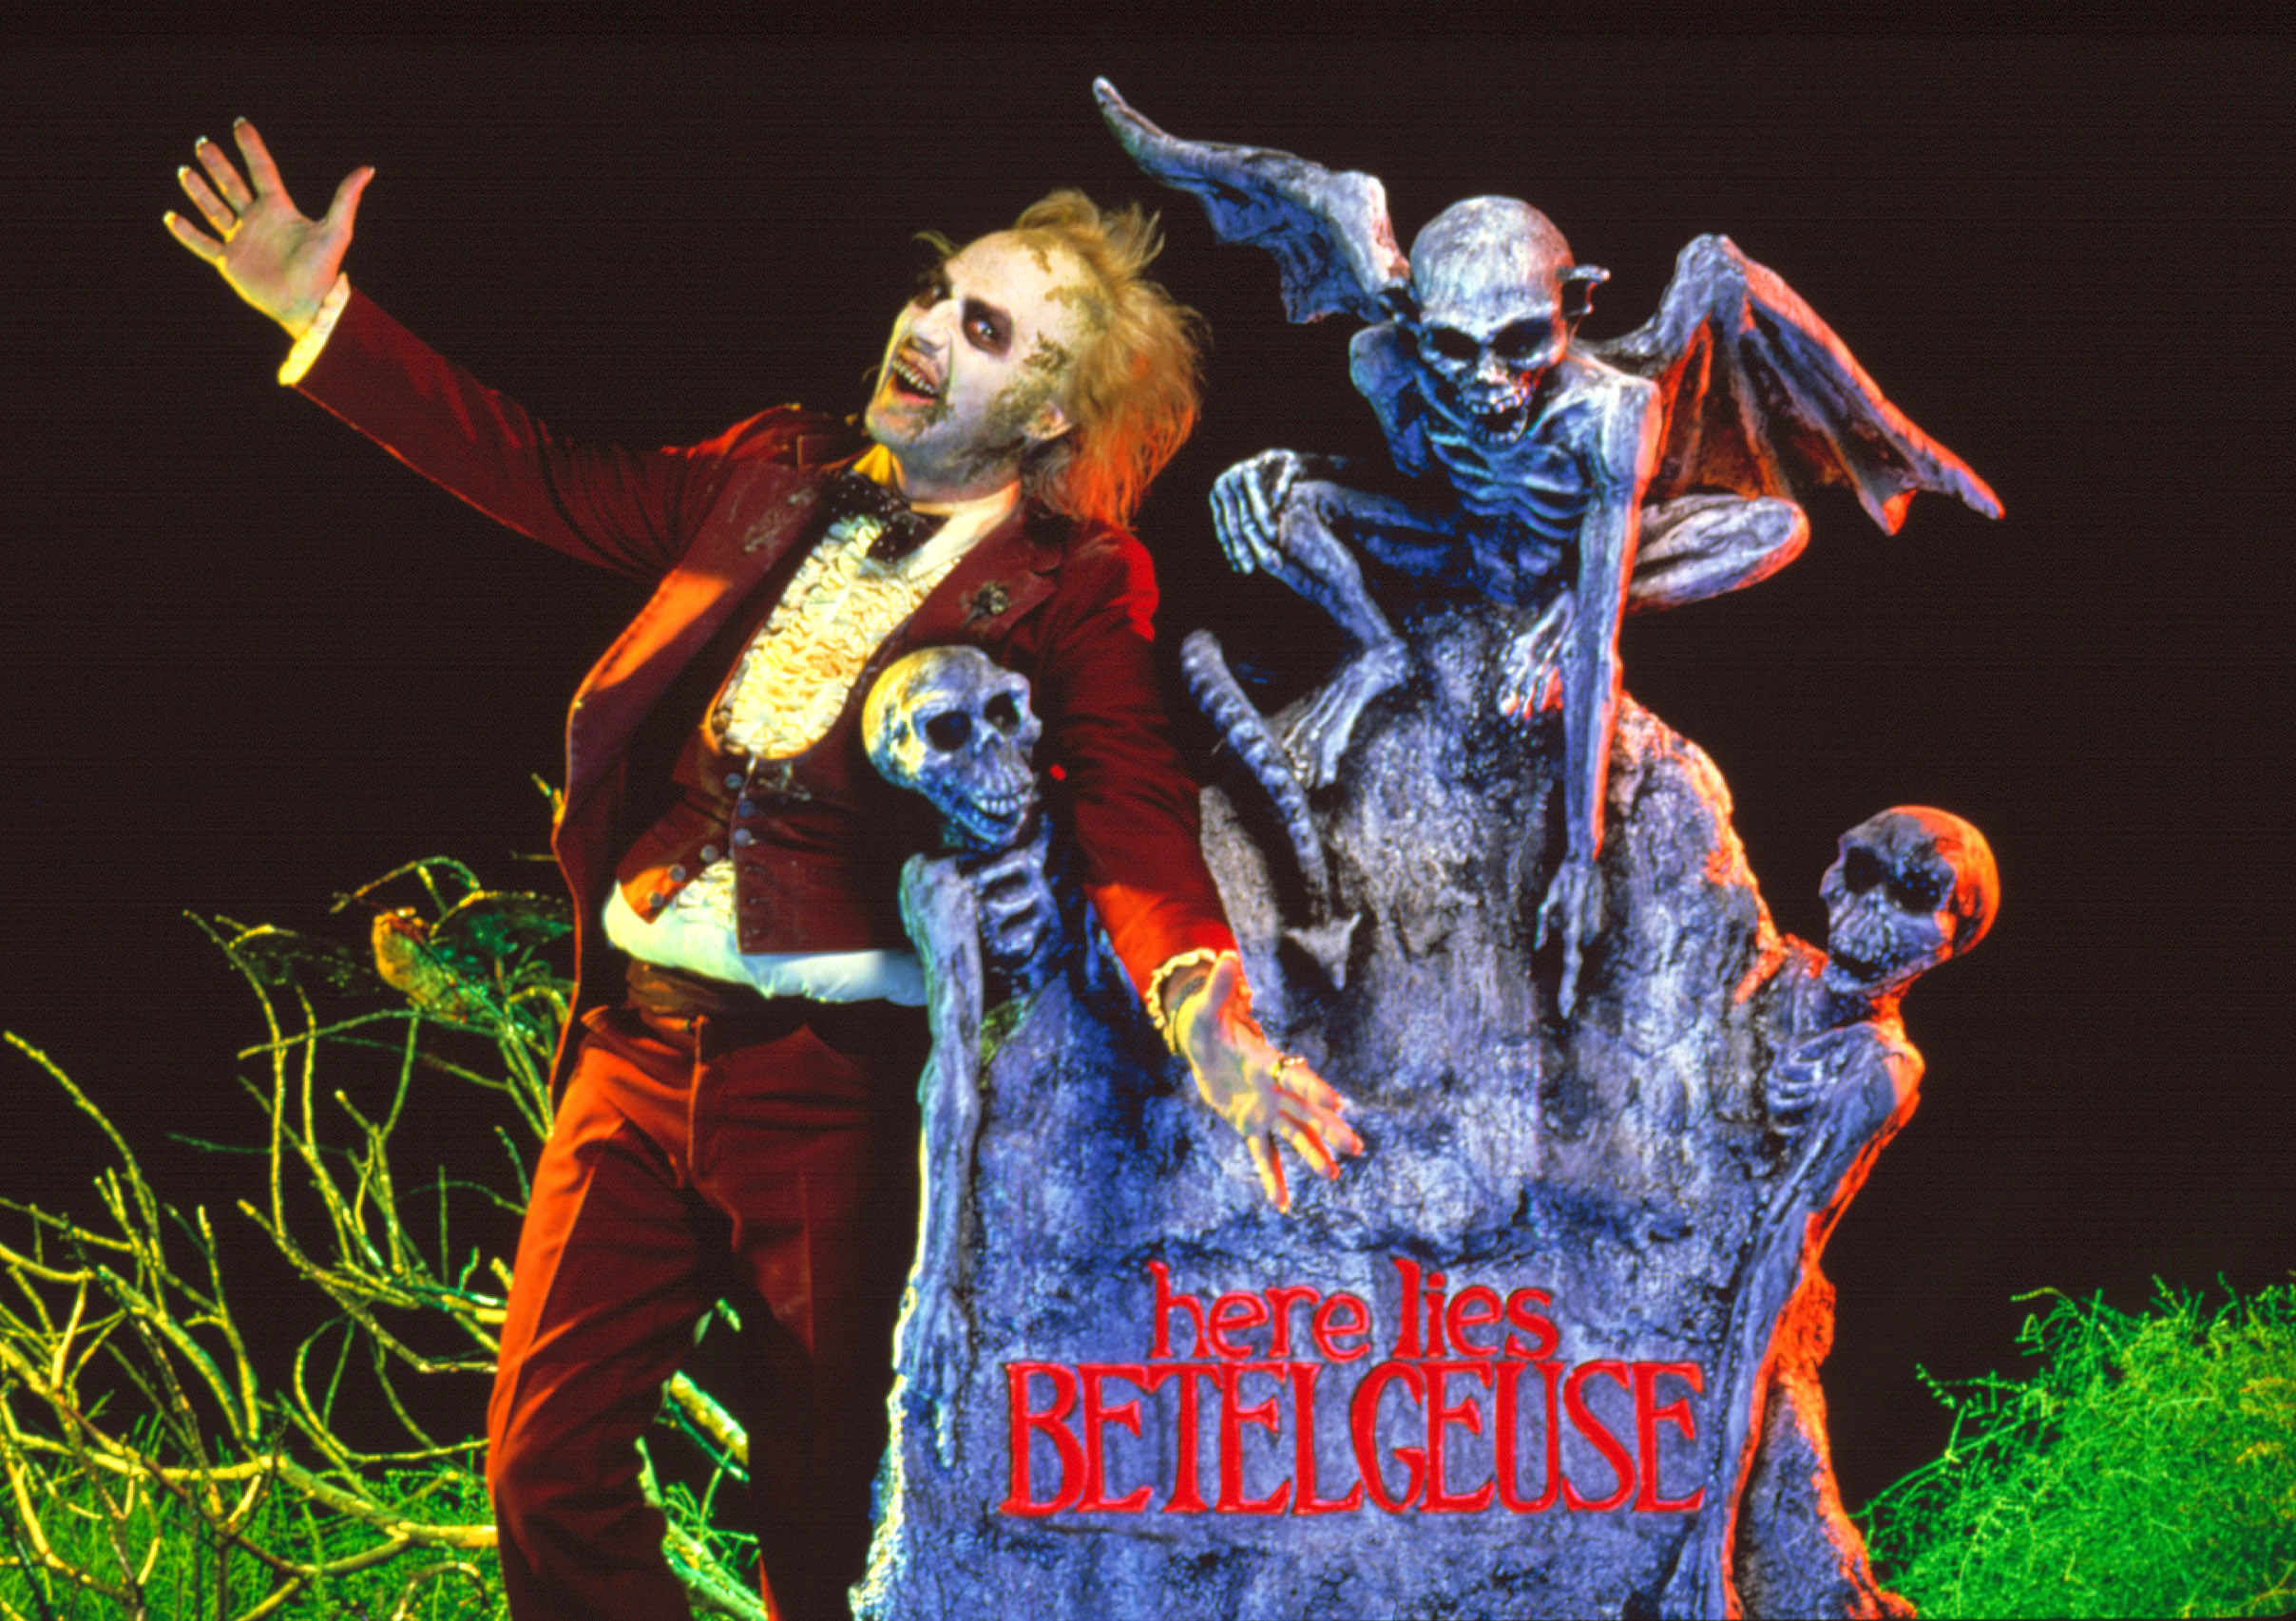 promo shot for film with Beetlejuice at his grave